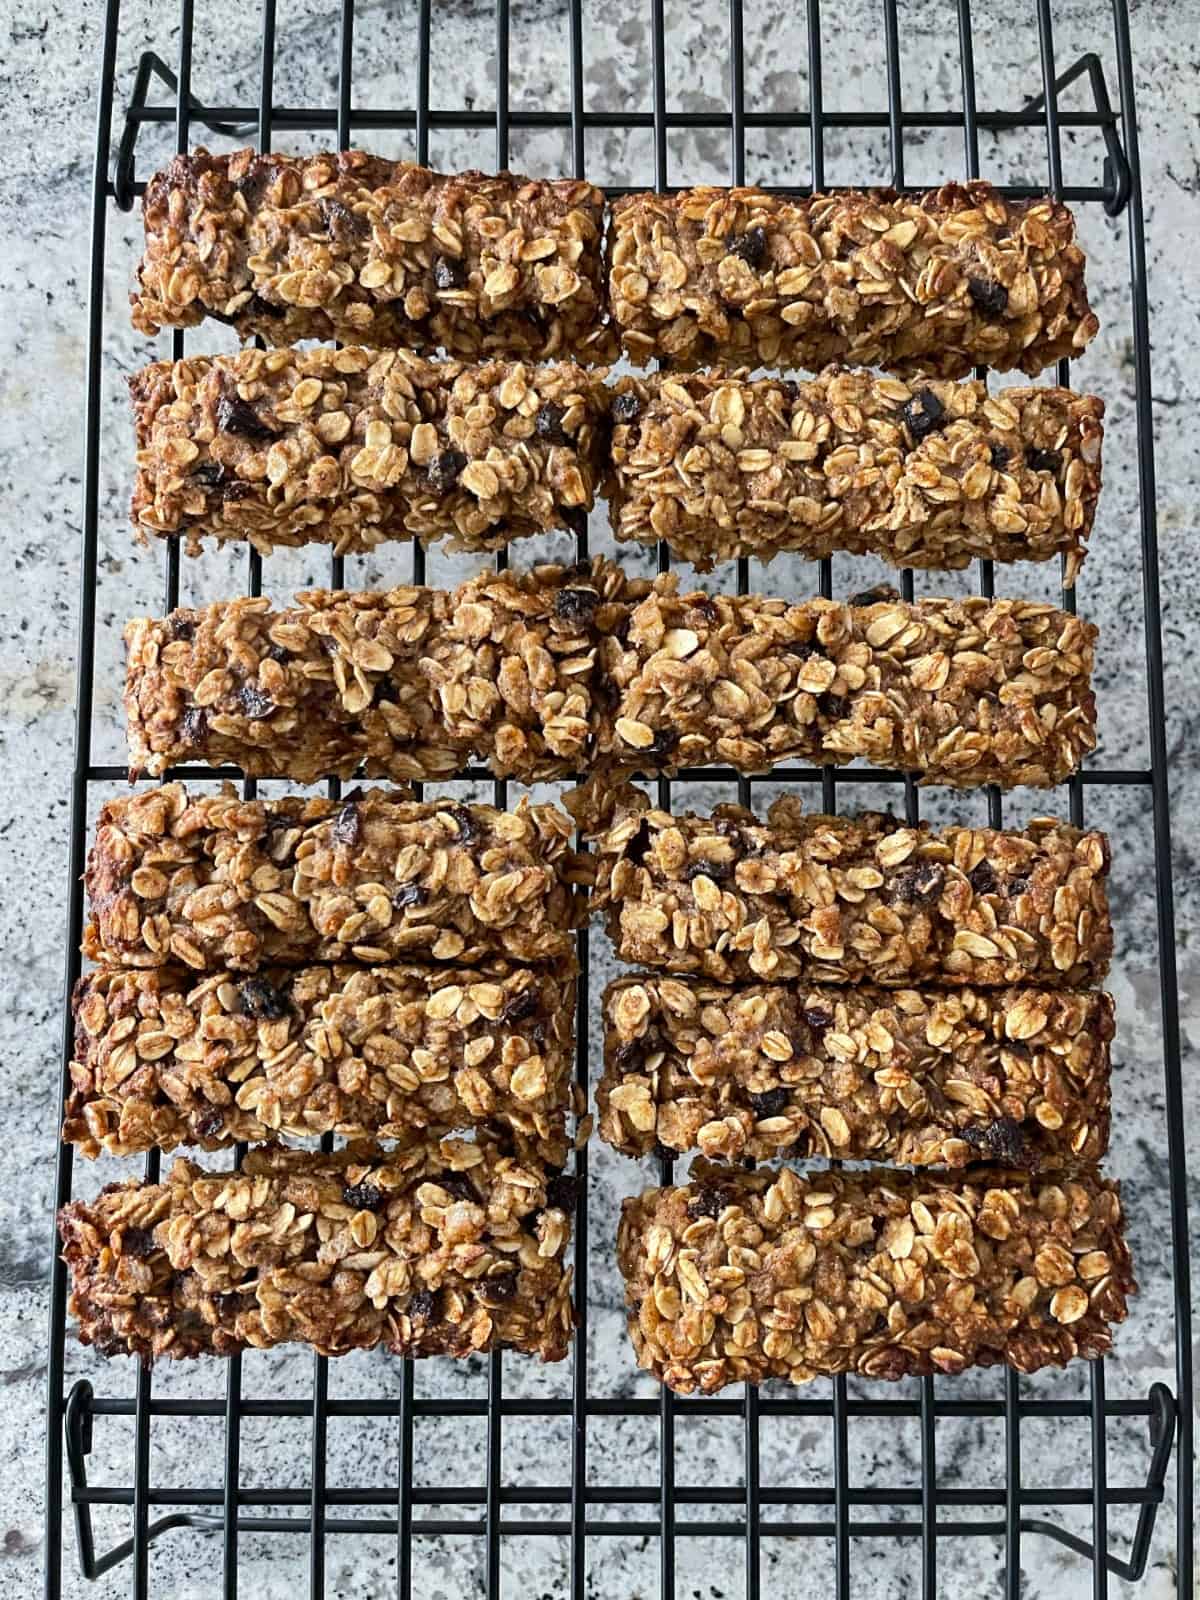 12 gluten-free oatmeal spice bars cooling on wire rack.